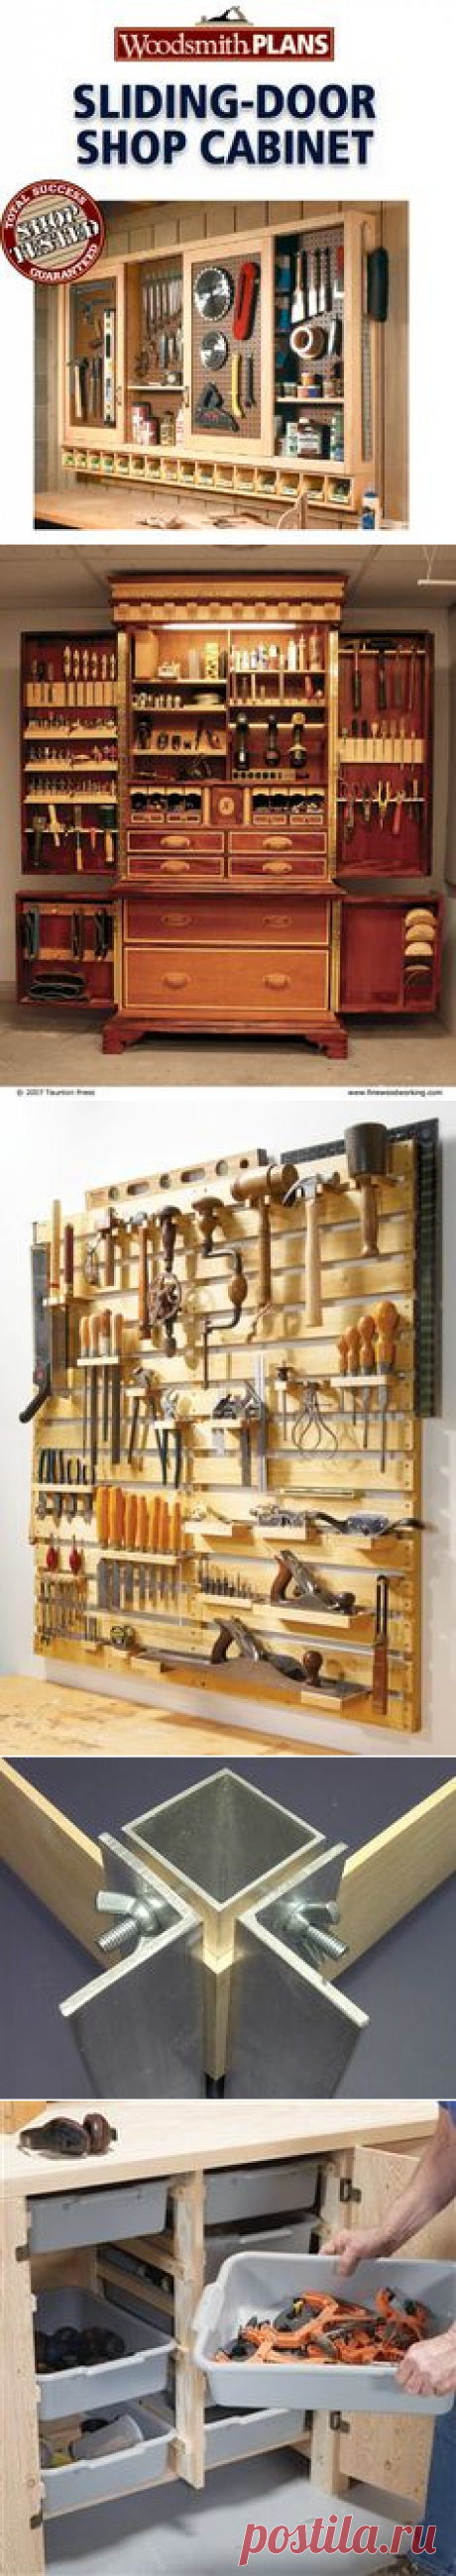 Wood shop cabinet. Can never have enough tool organization. | jc | Wood Shops, Shop Cabinets and Tools ДЛЯ МУЖЧИН.